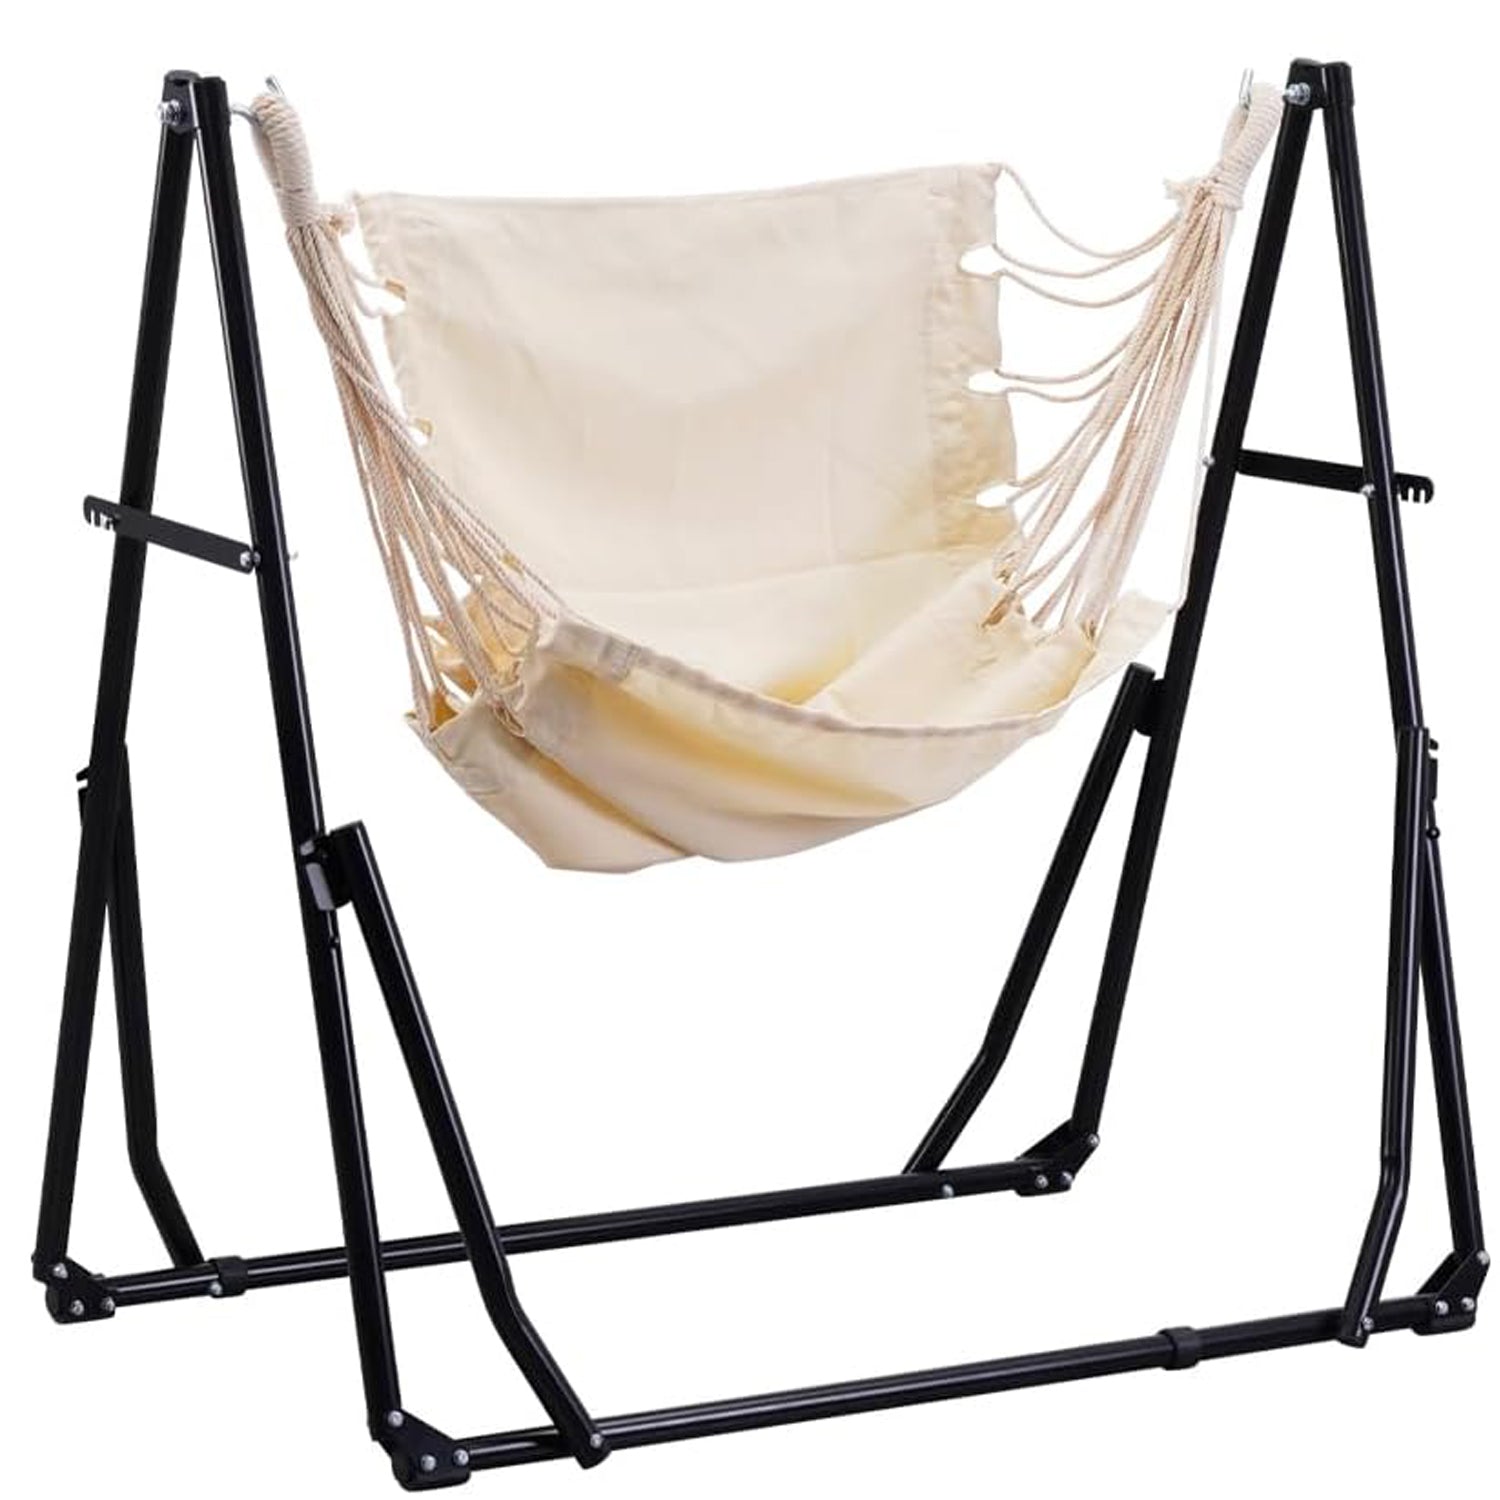 8' Convertible Portable Hammock w/ Stand (White) $42 + Free Shipping